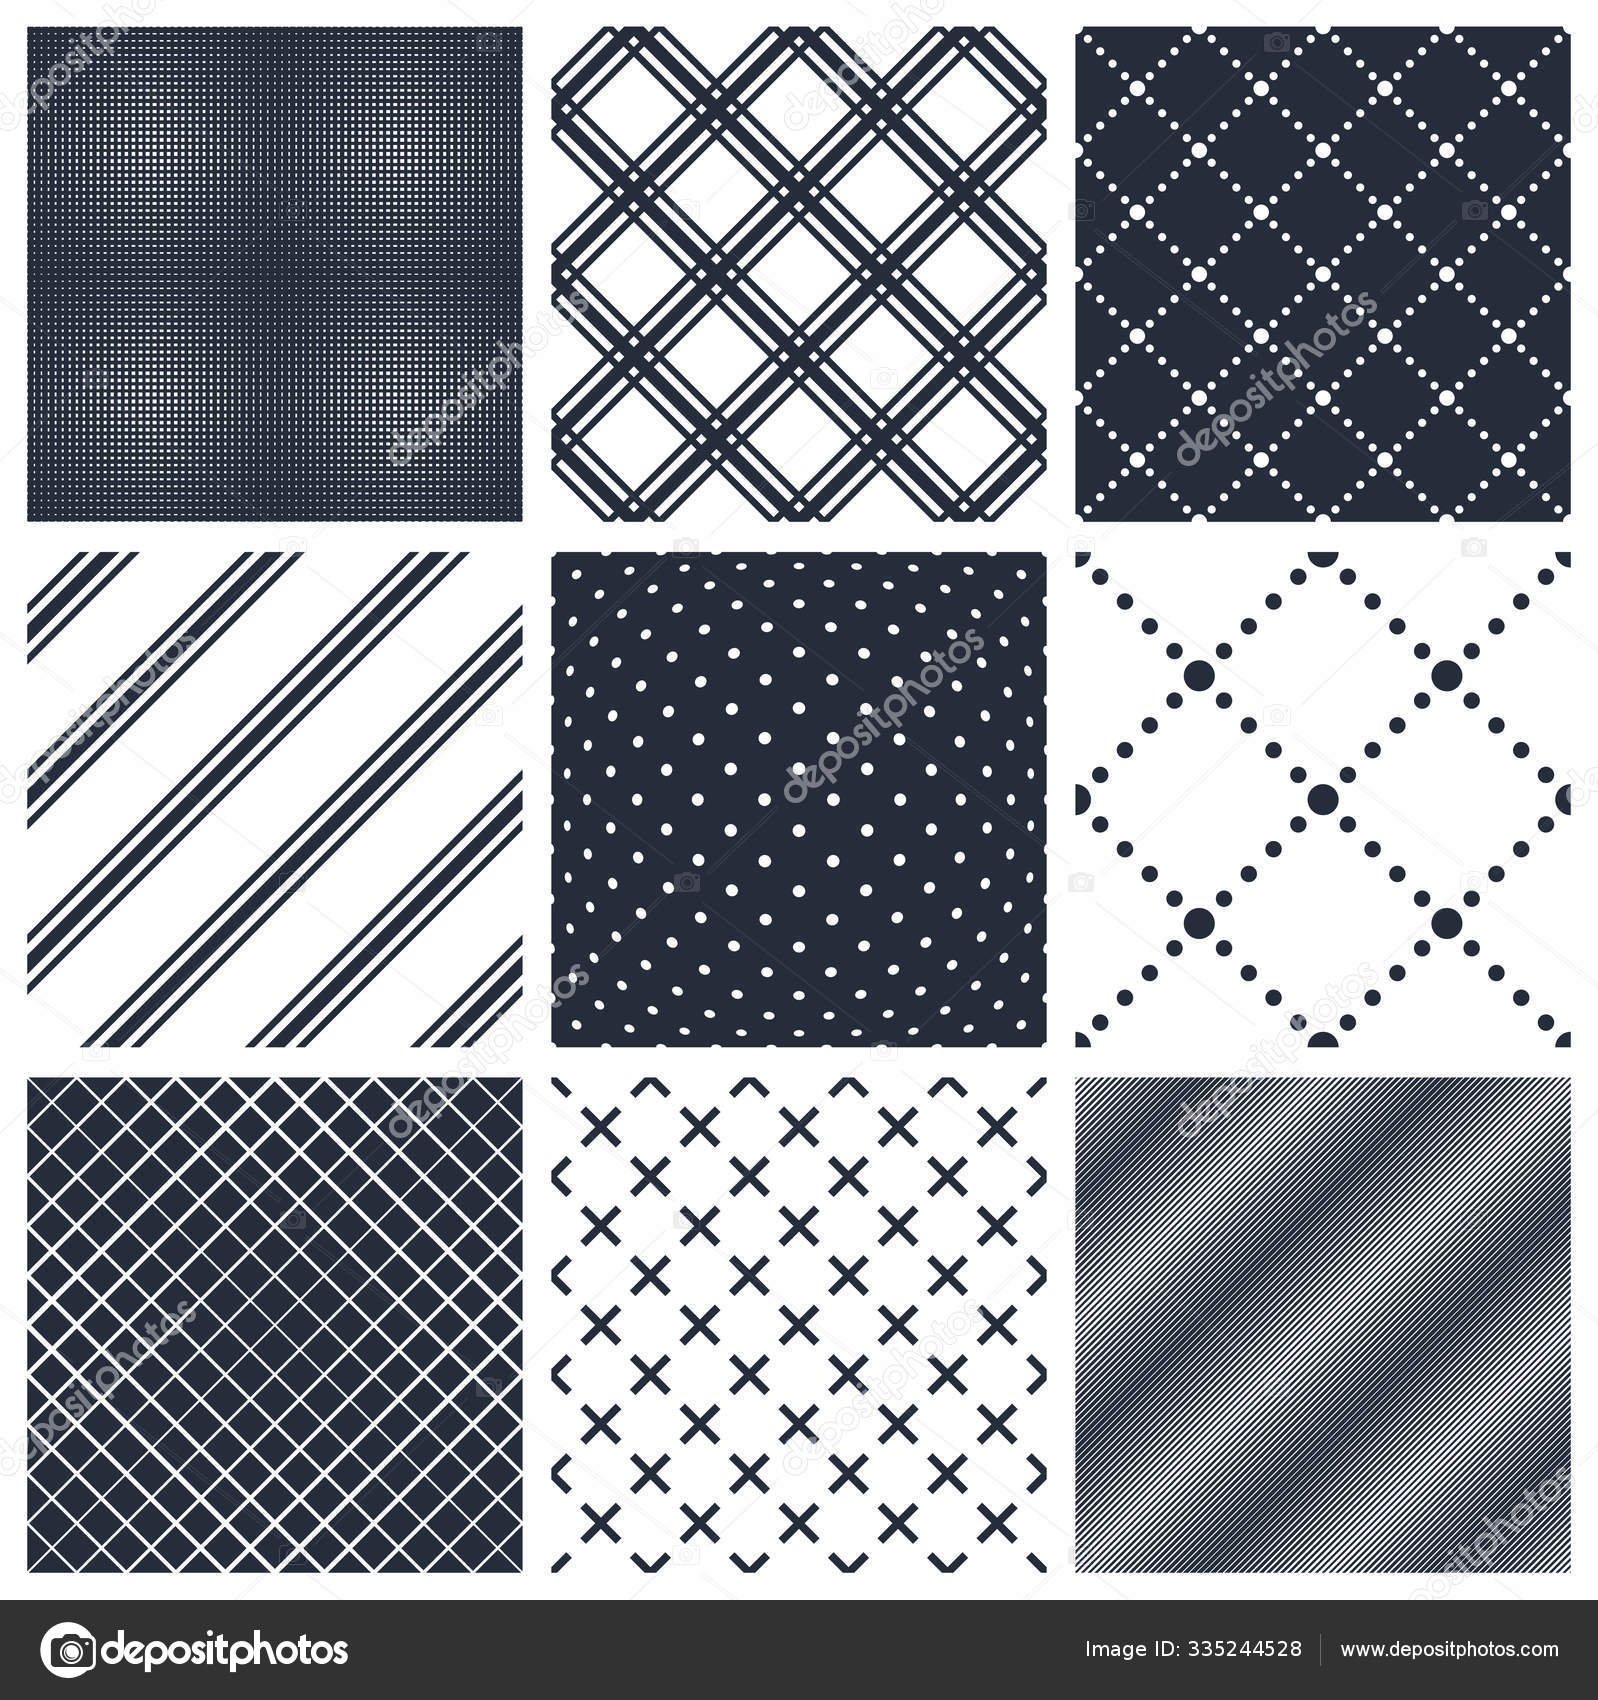 Seamless Geometric Patterns: A Collection of 9 Repeating Designs